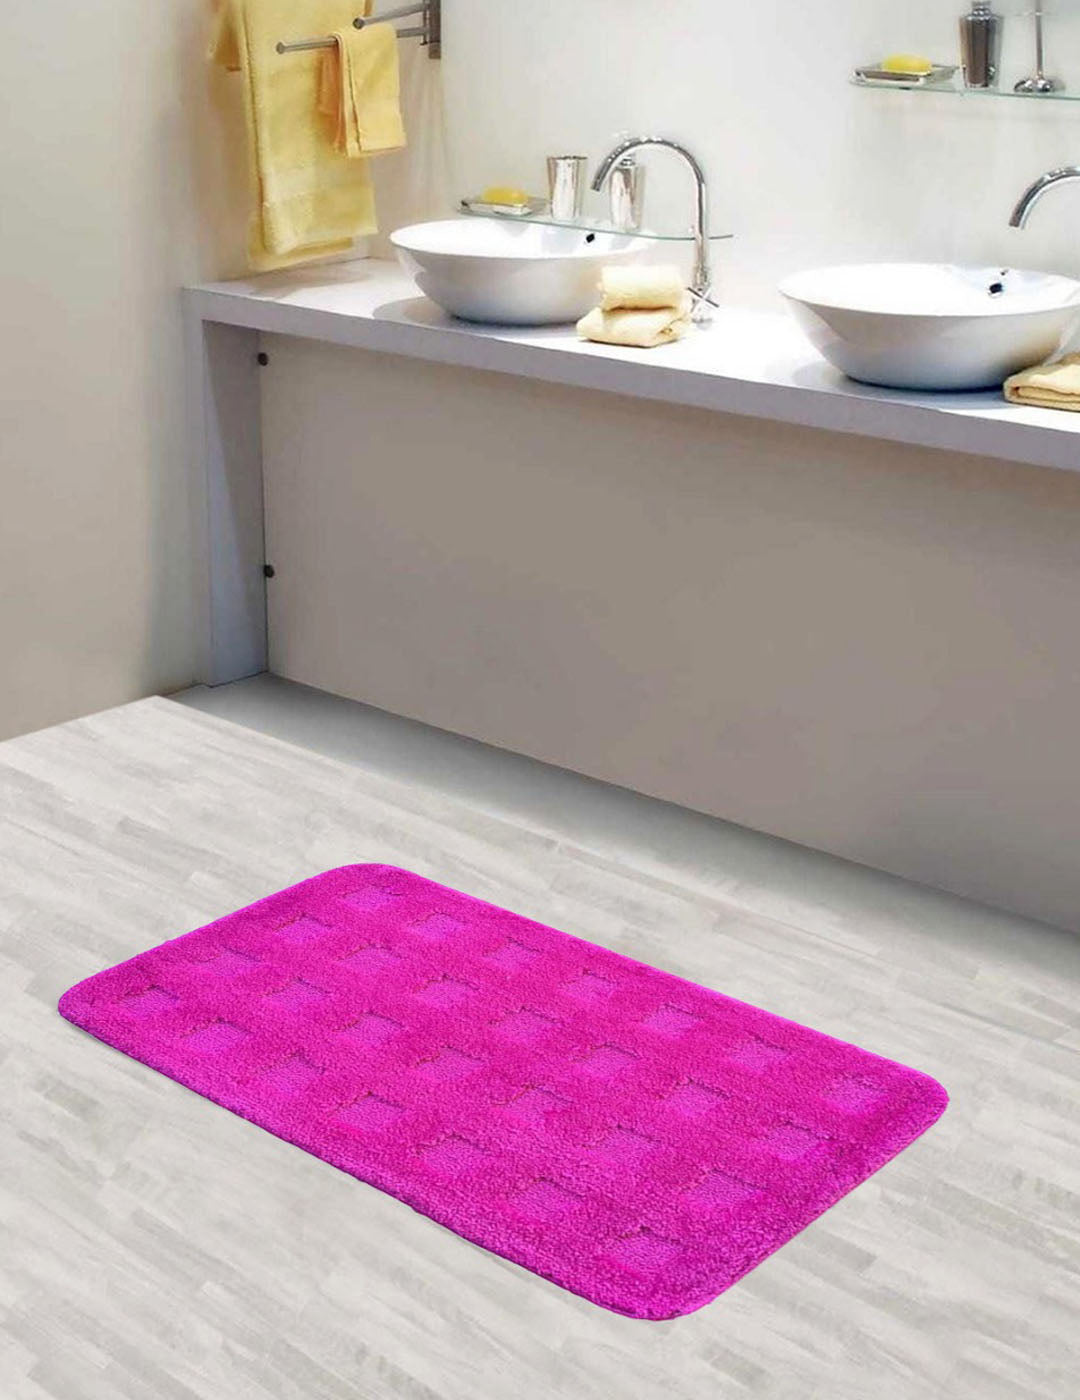 Lushomes Bathroom Mat, 1200 GSM Floor Mat with High Pile Microfiber, mat for bathroom floor with Anti Skid Latex Backing, floor mats for home, non slip (19 x 30 Inch, Single Pc, Pink)